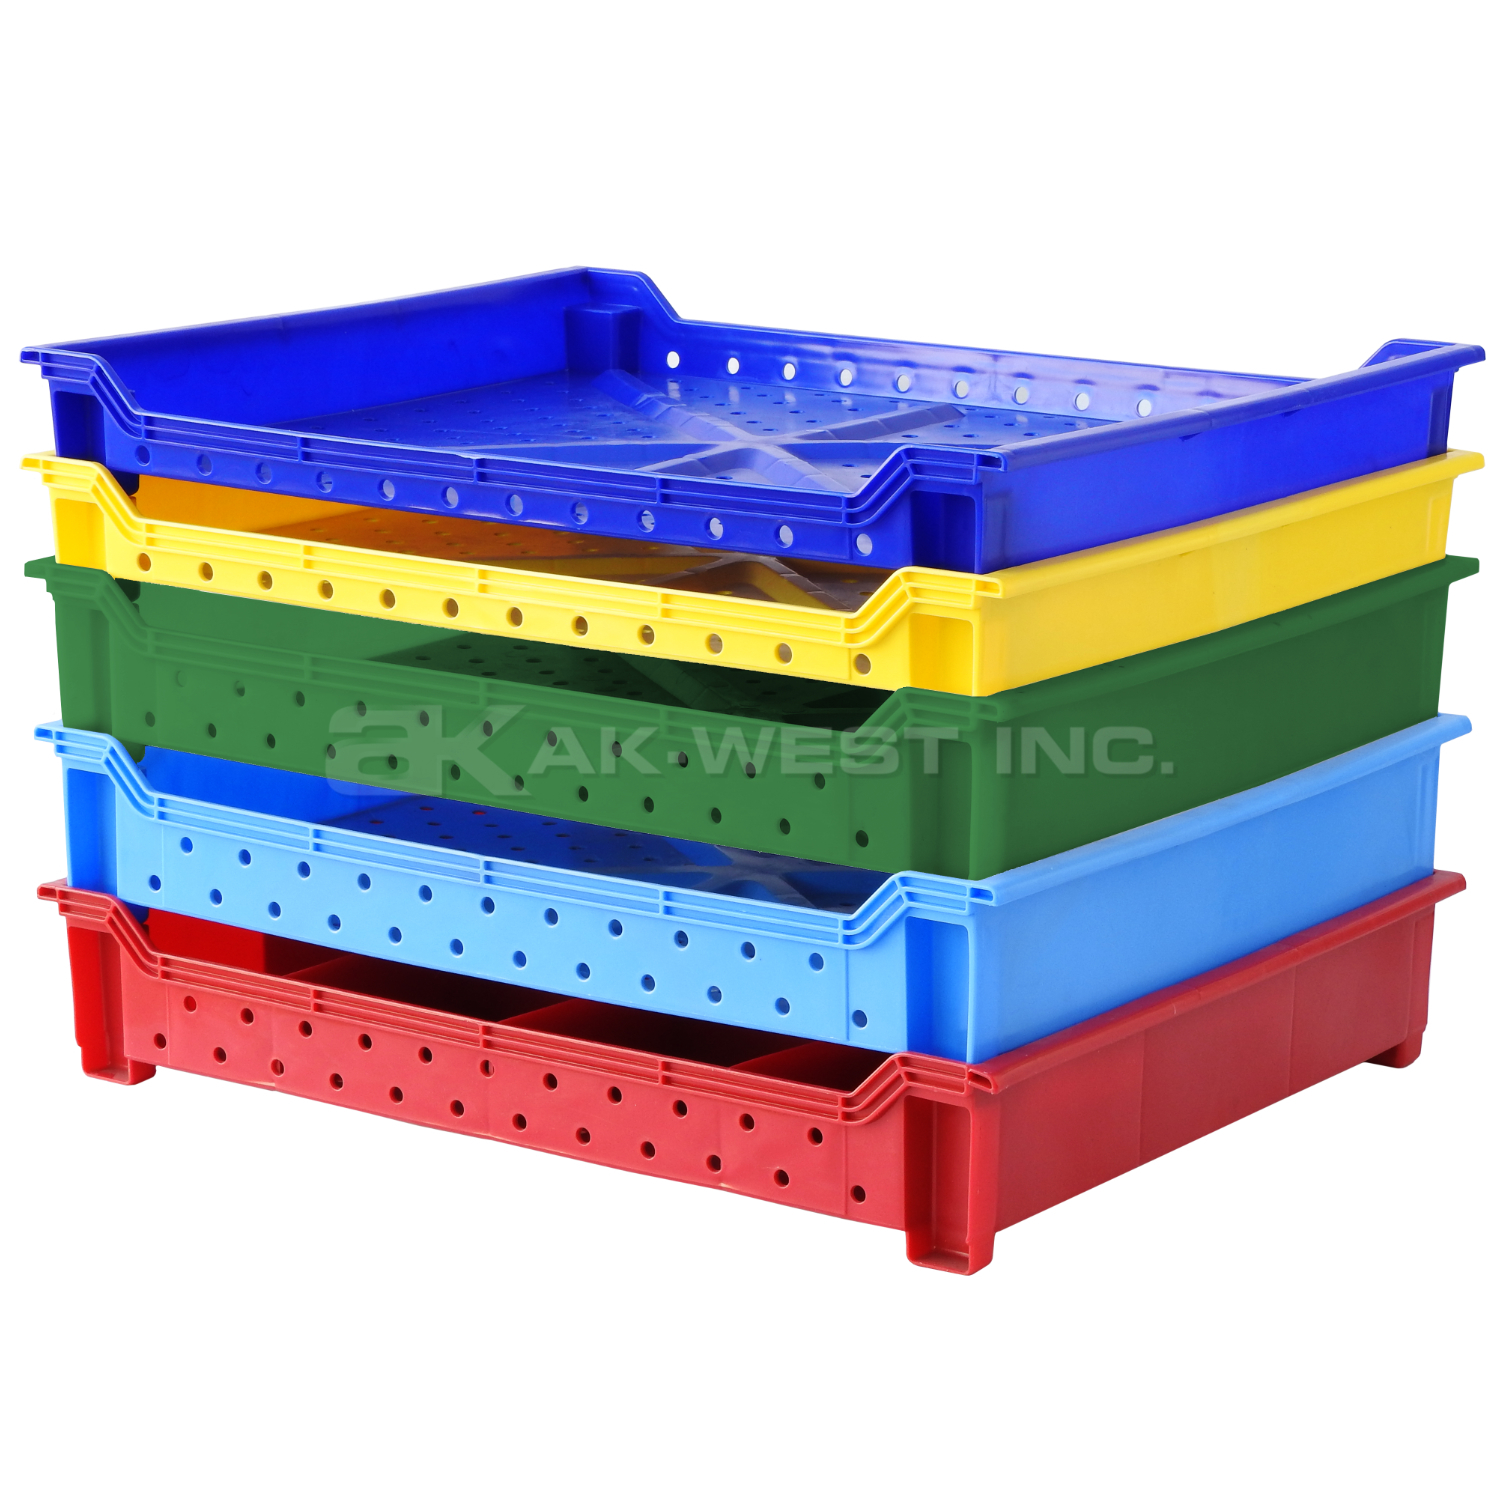 Yellow, 24"L x 18"W x 4"H Stackable Tray w/ Vented Sides and Base